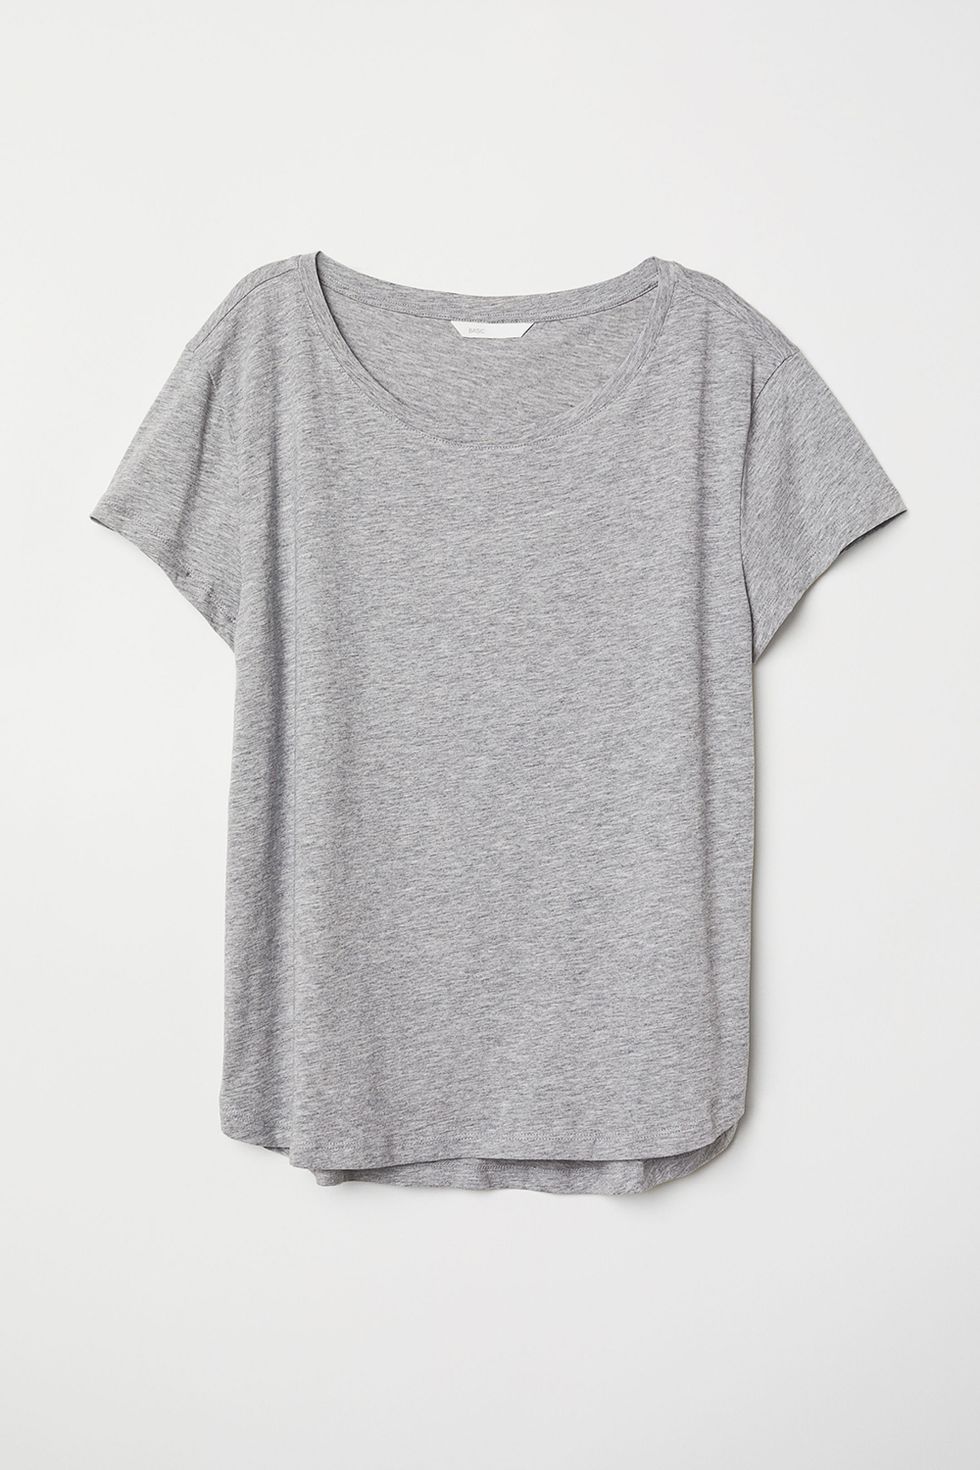 Clothing, T-shirt, White, Sleeve, Grey, Top, Blouse, Outerwear, Crop top, Neck, 